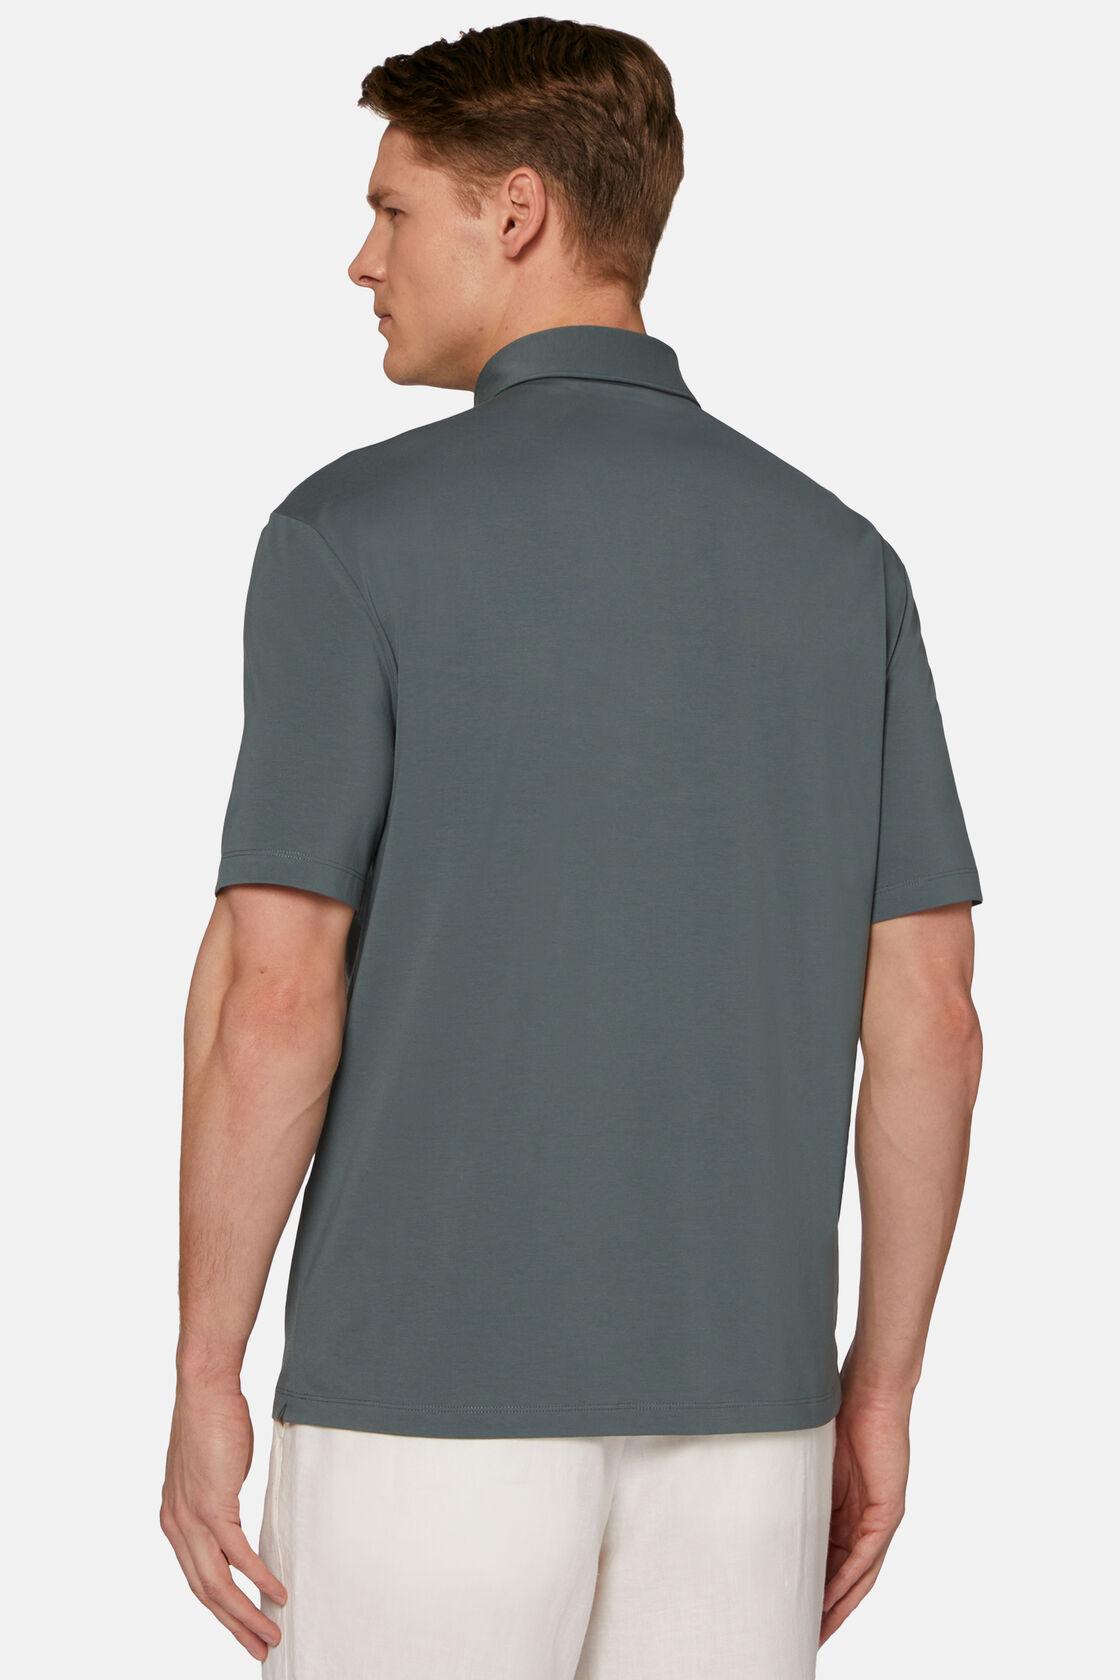 Polo Shirt In Stretch Supima Cotton, Green, hi-res